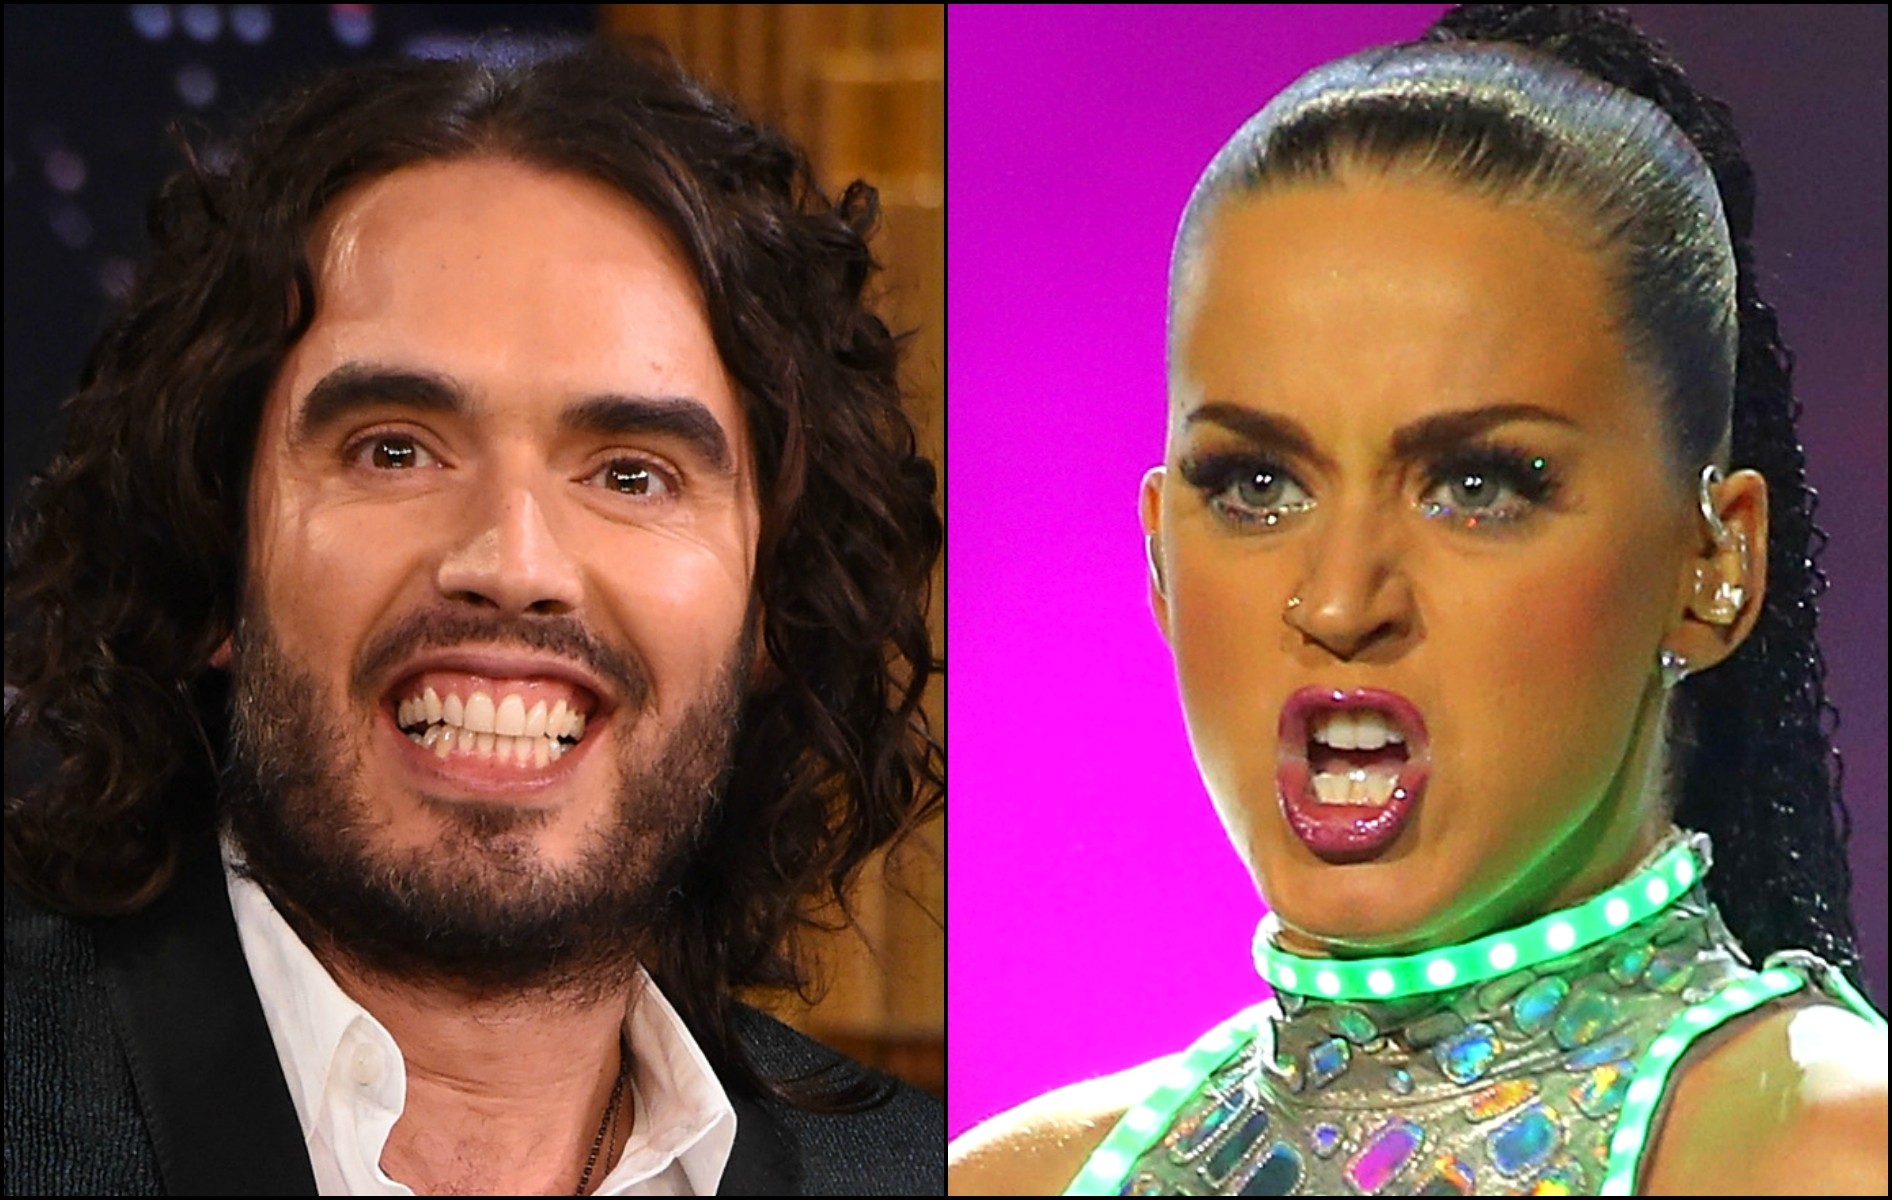 Russel Brand e Katy Perry. (Foto: Getty Images)